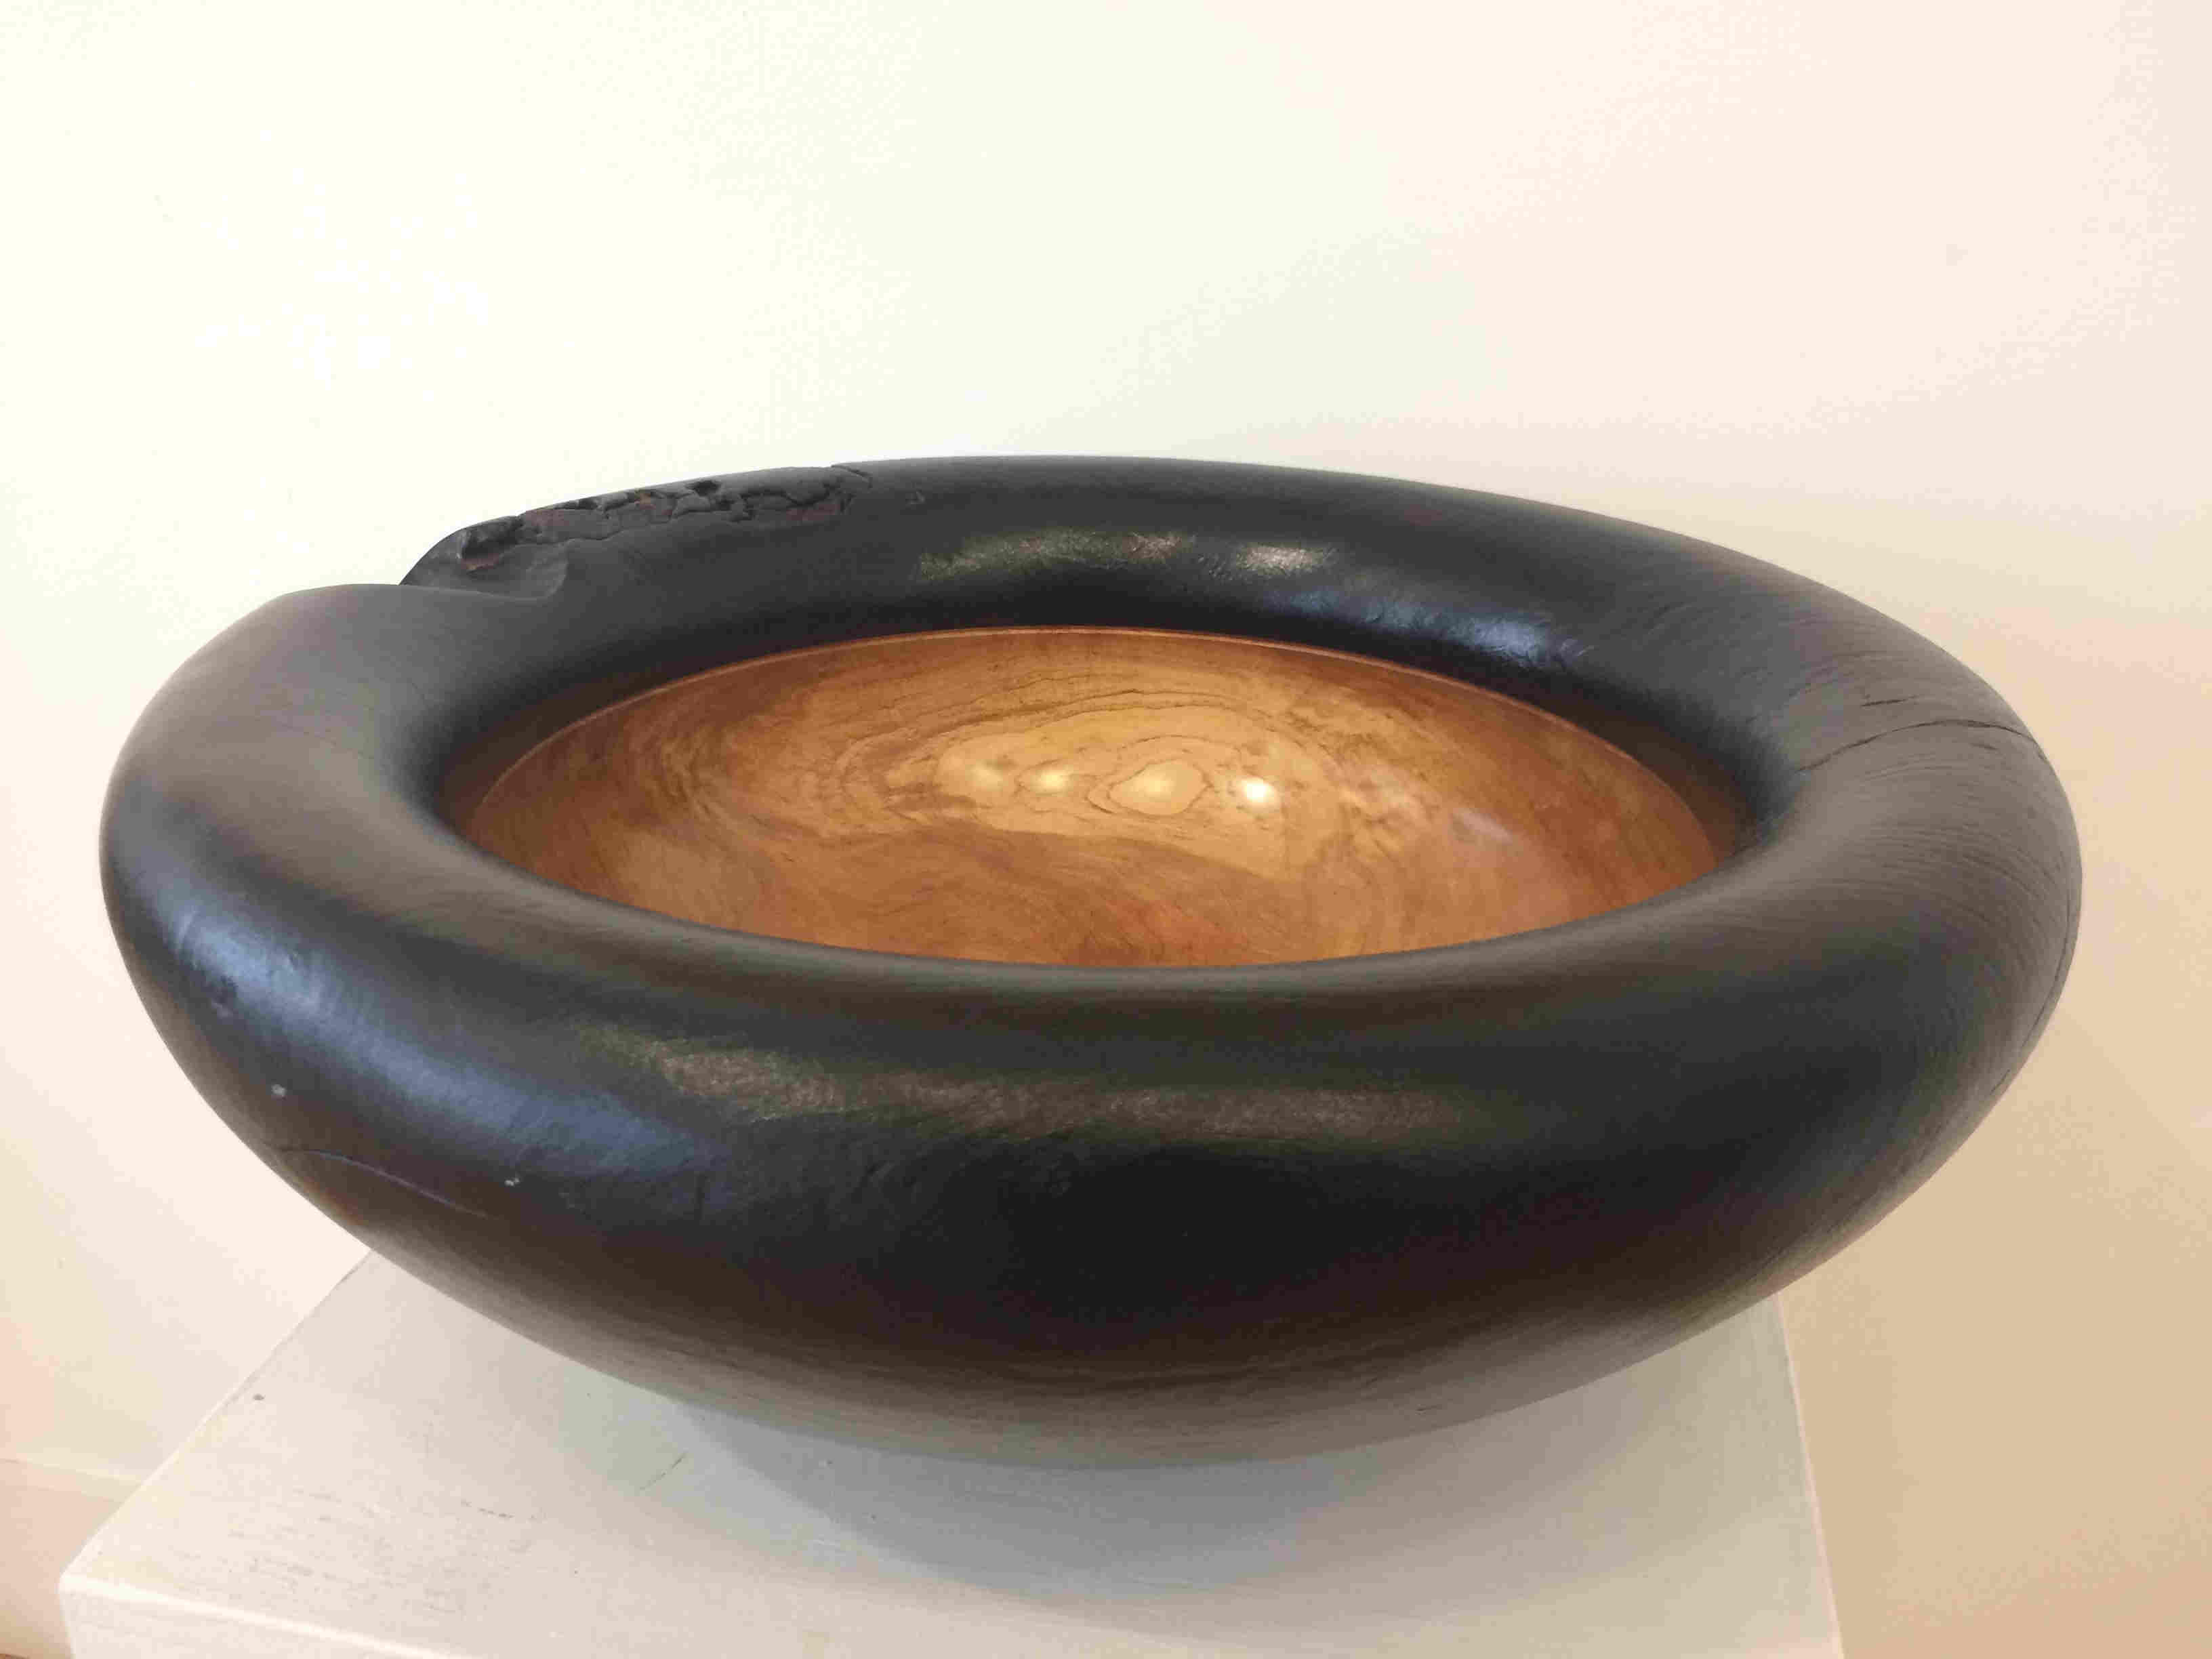 'Spalted Sycamore Bowl' by artist Angus Clyne